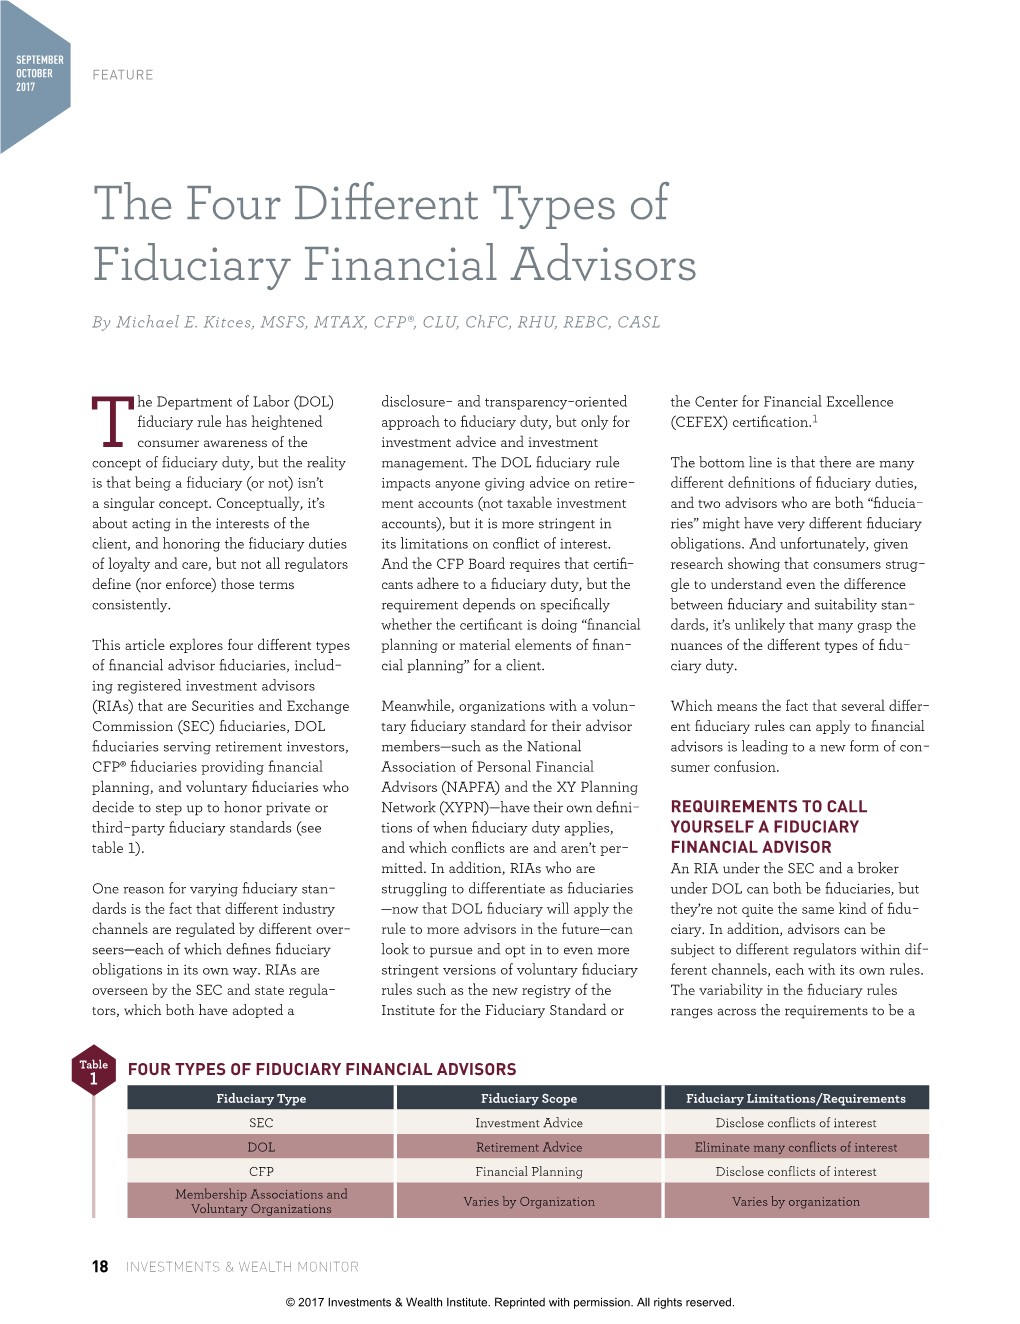 The Four Different Types of Fiduciary Financial Advisors